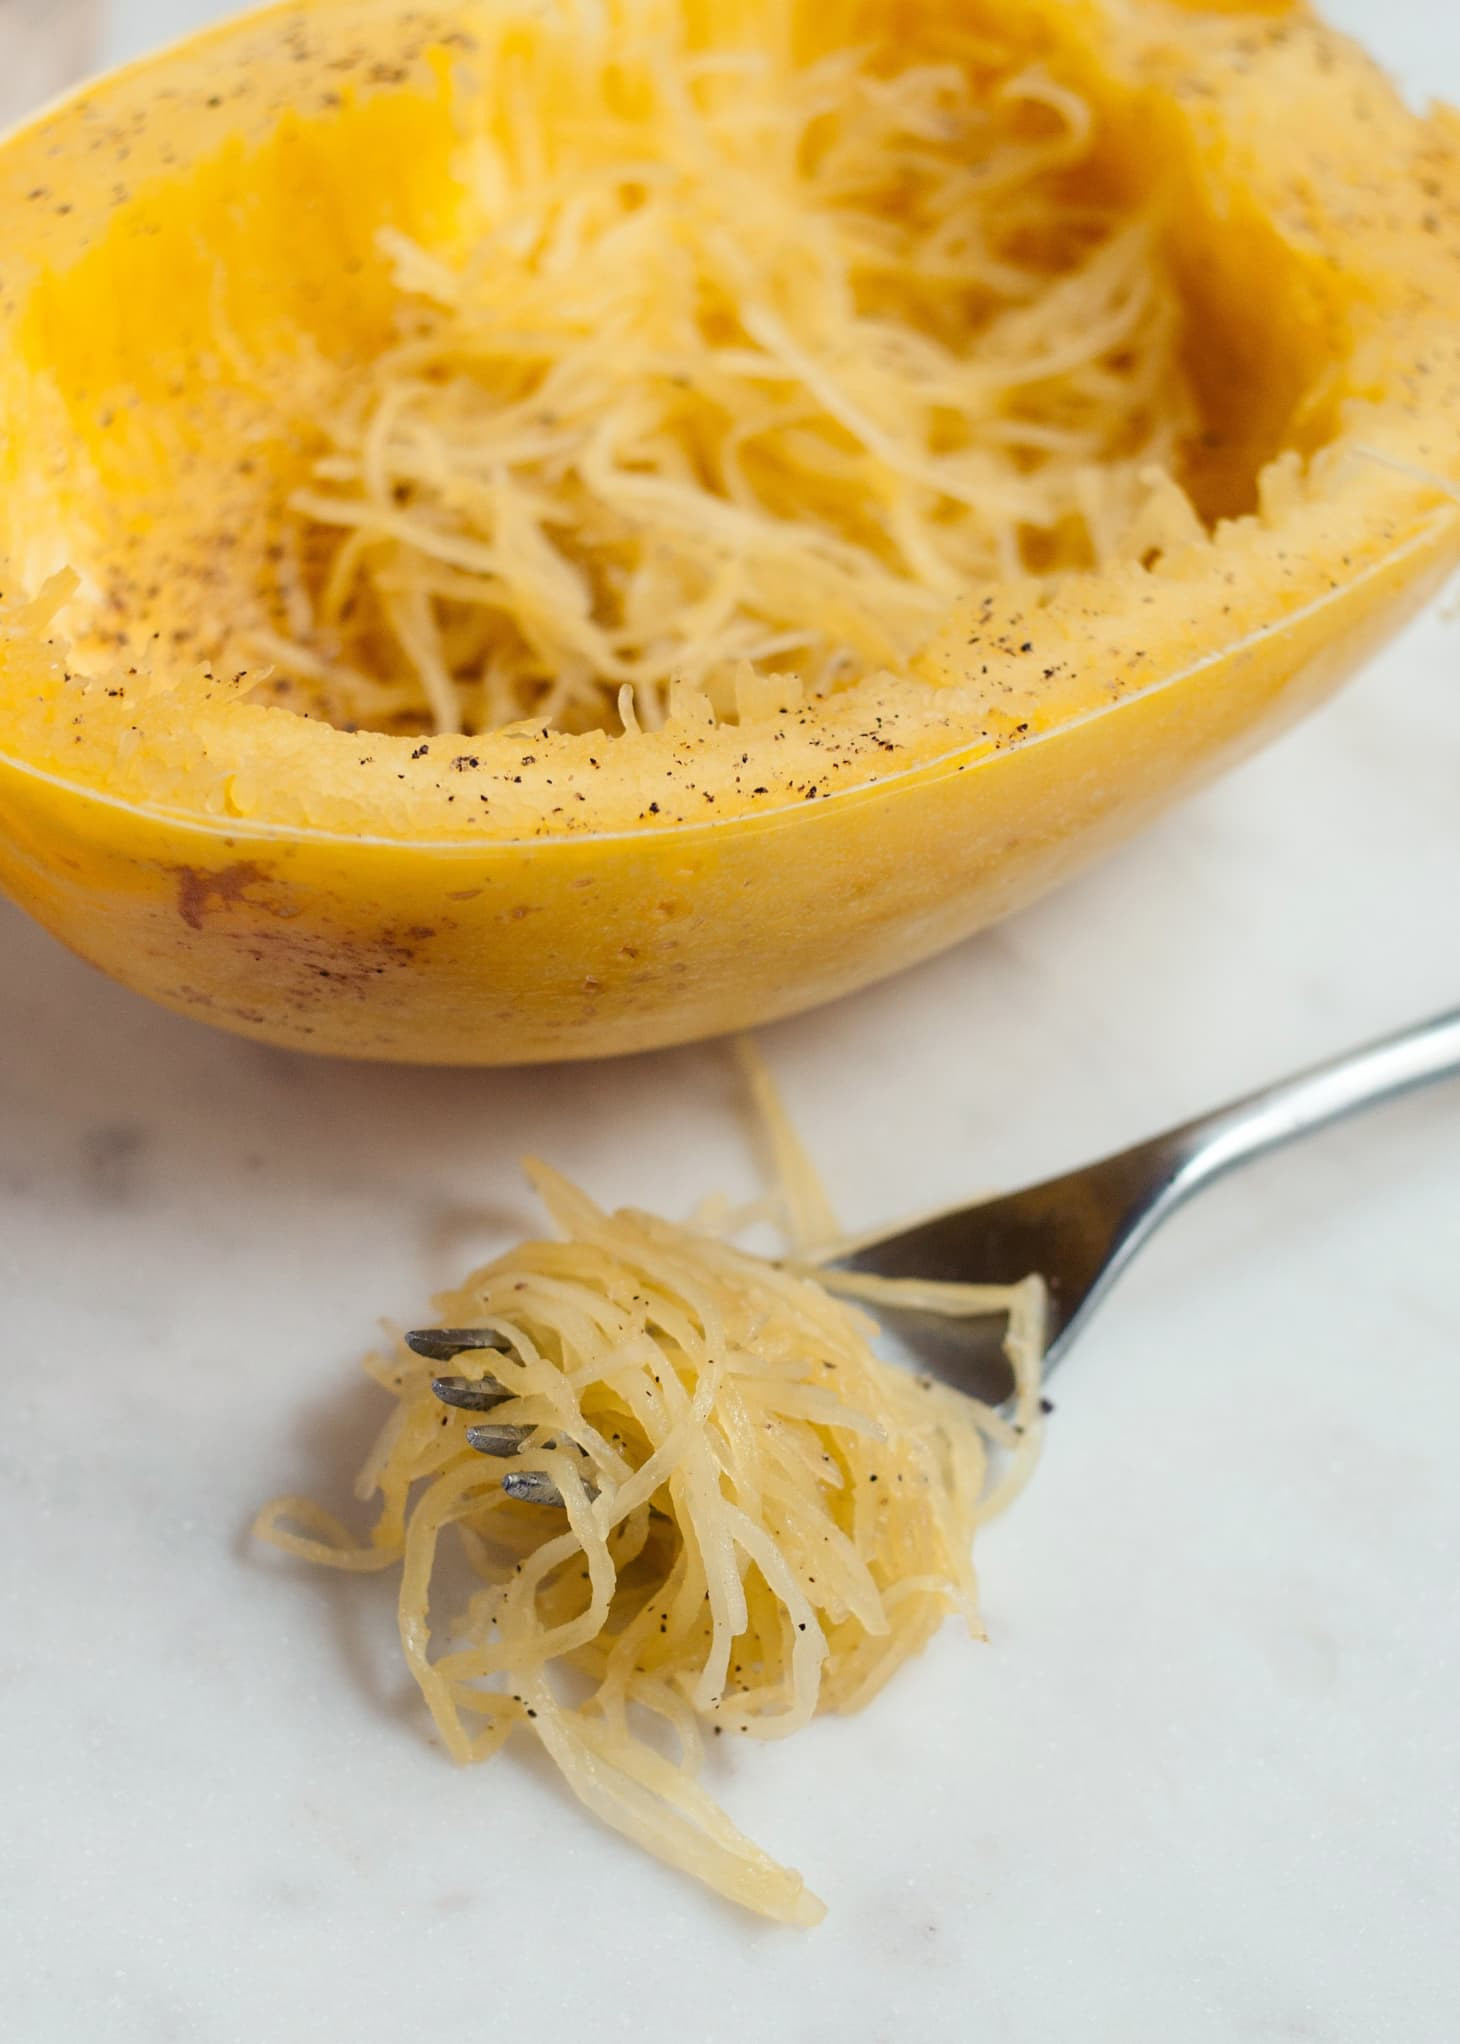 Cooking Spaghetti Squash In Microwave
 How To Cook Spaghetti Squash in the Microwave